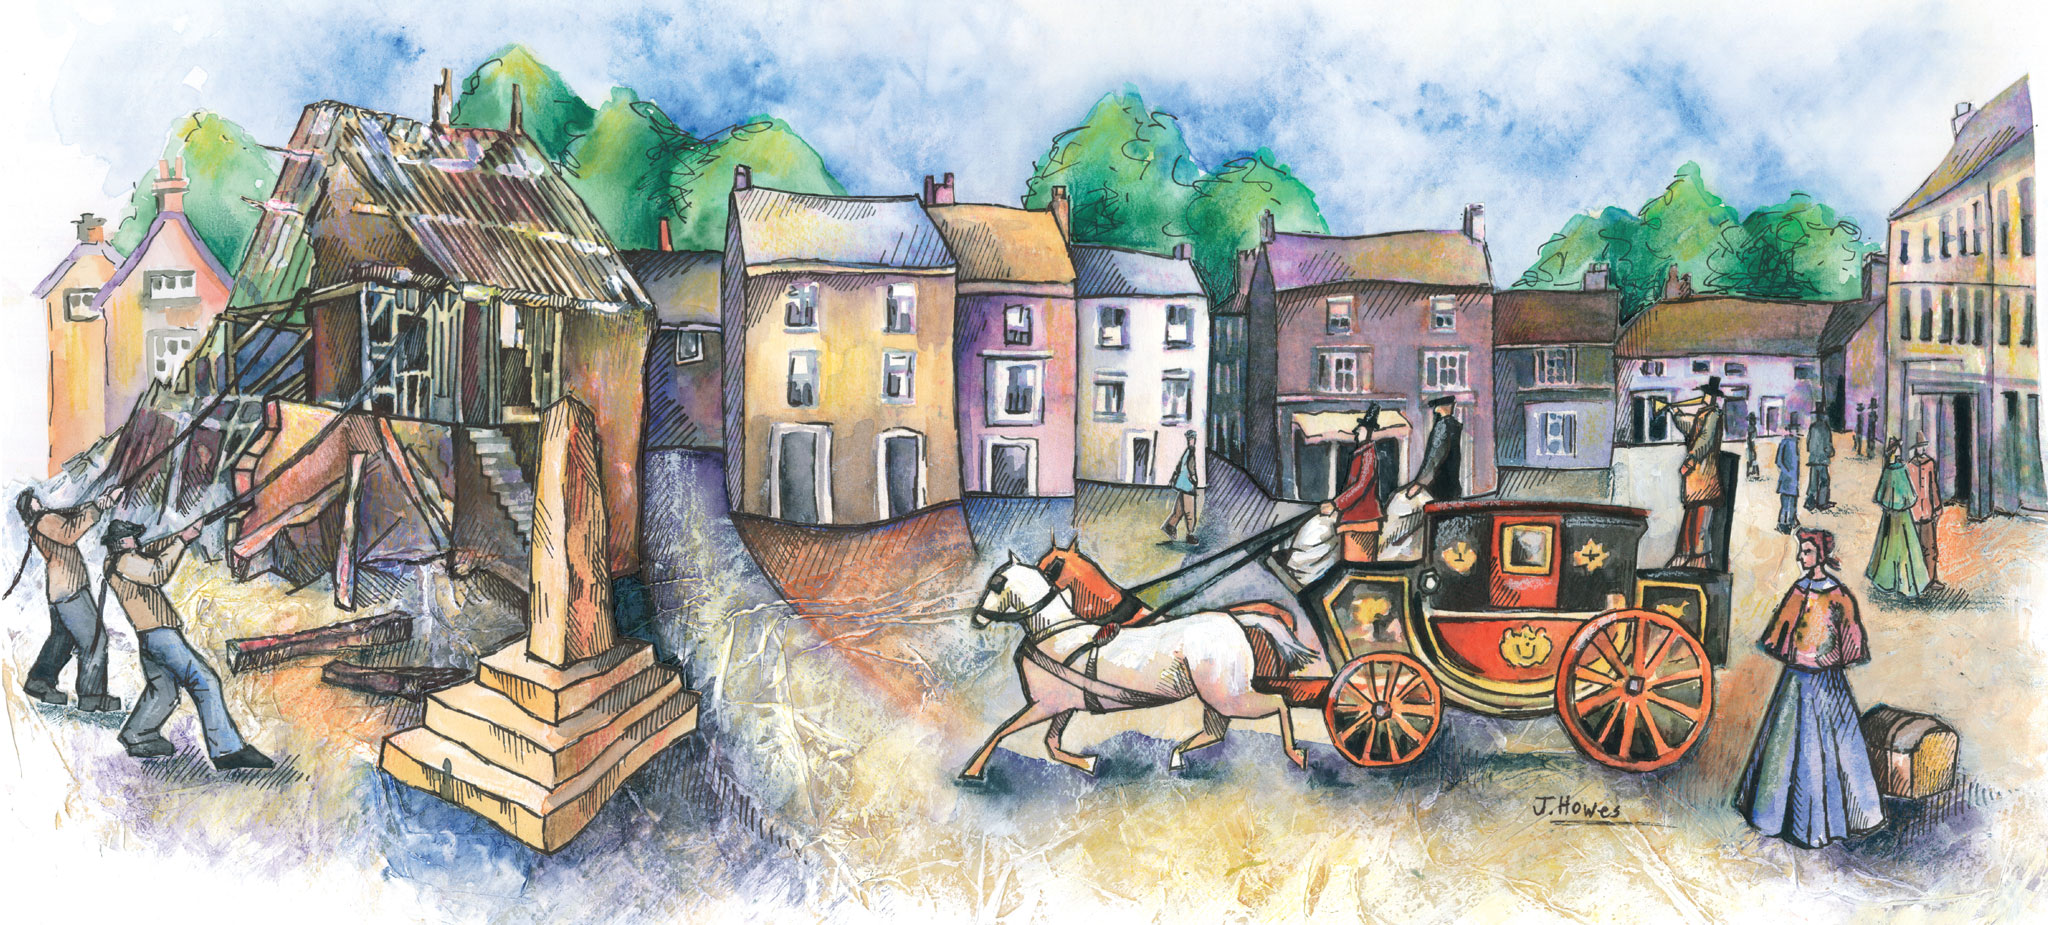 Drawing of the Market Place with stagecoach